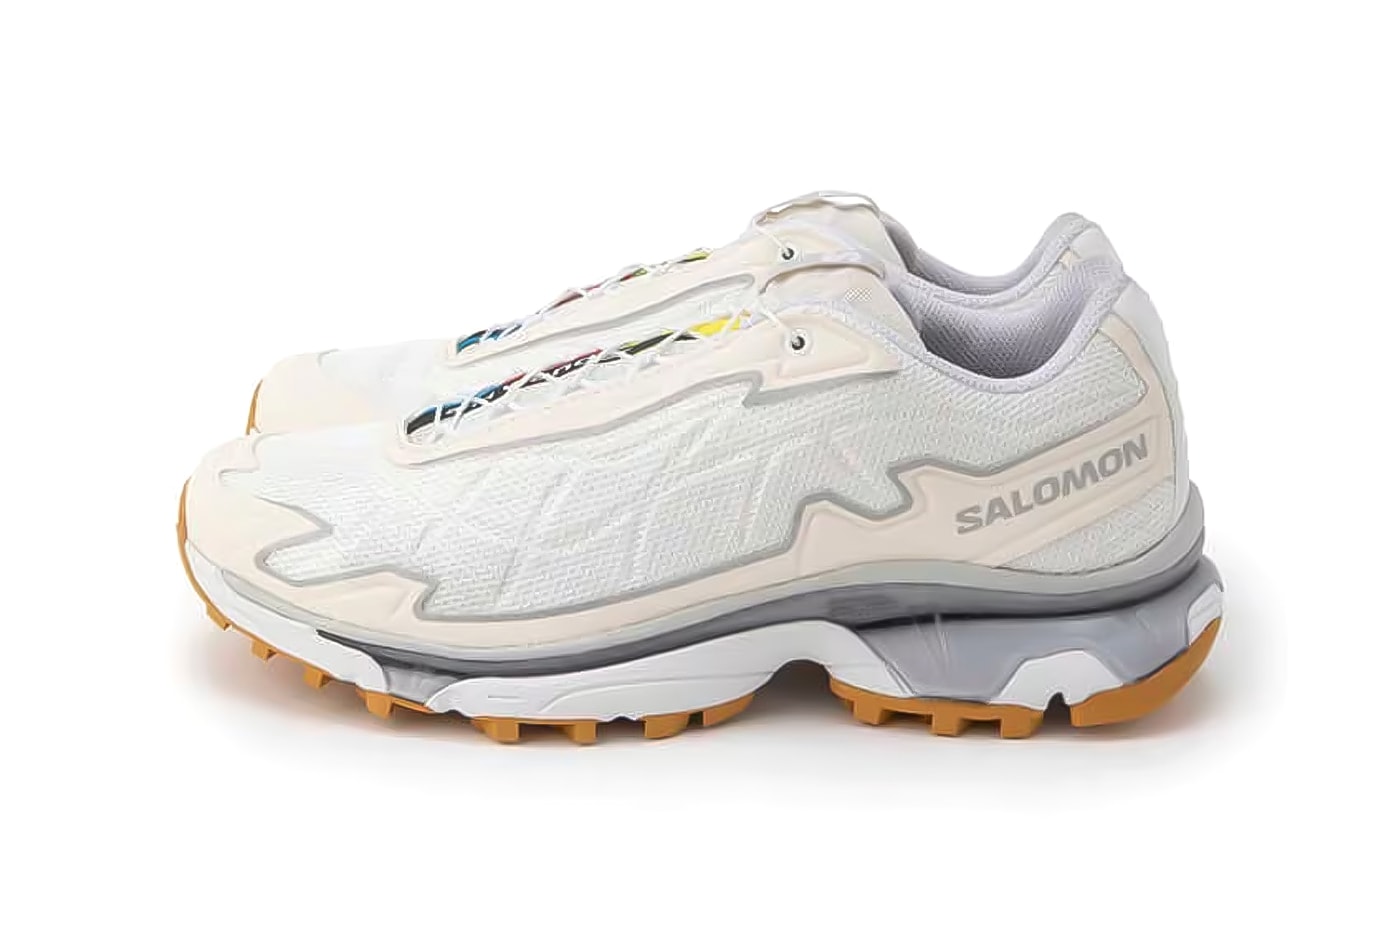 What's Behind the Salomon Hype Train?